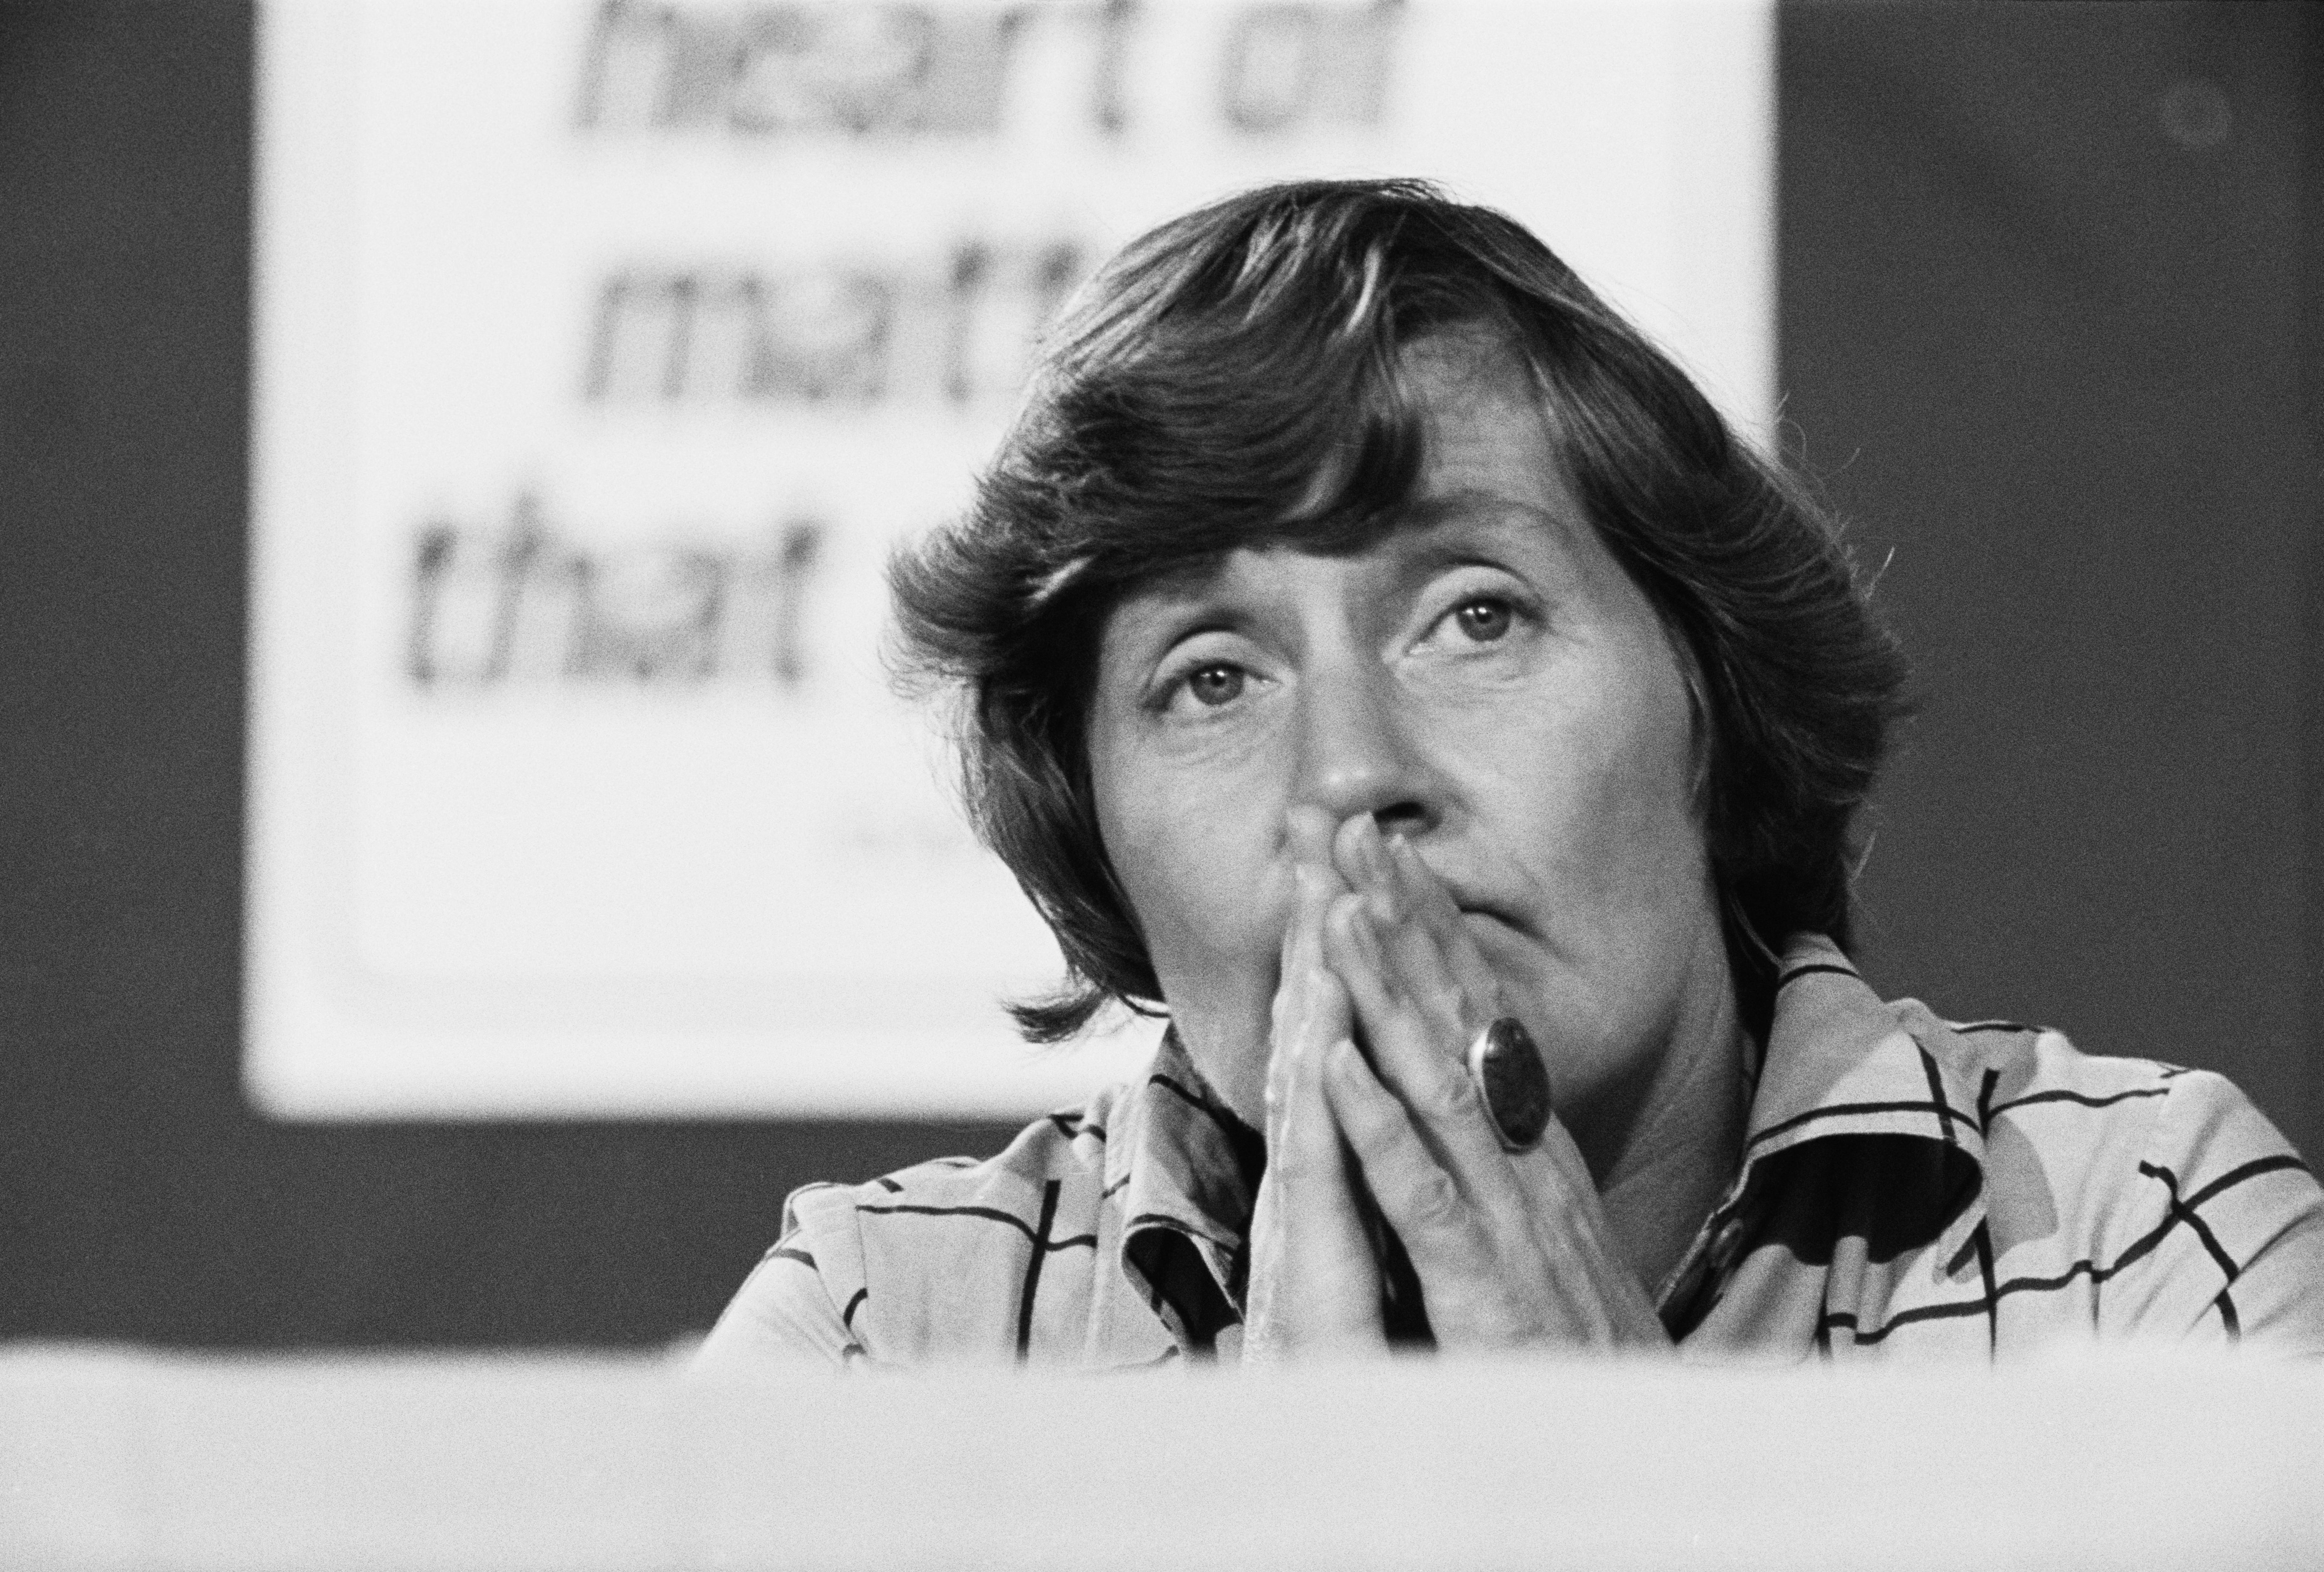 Williams at the Labour conference in 1976